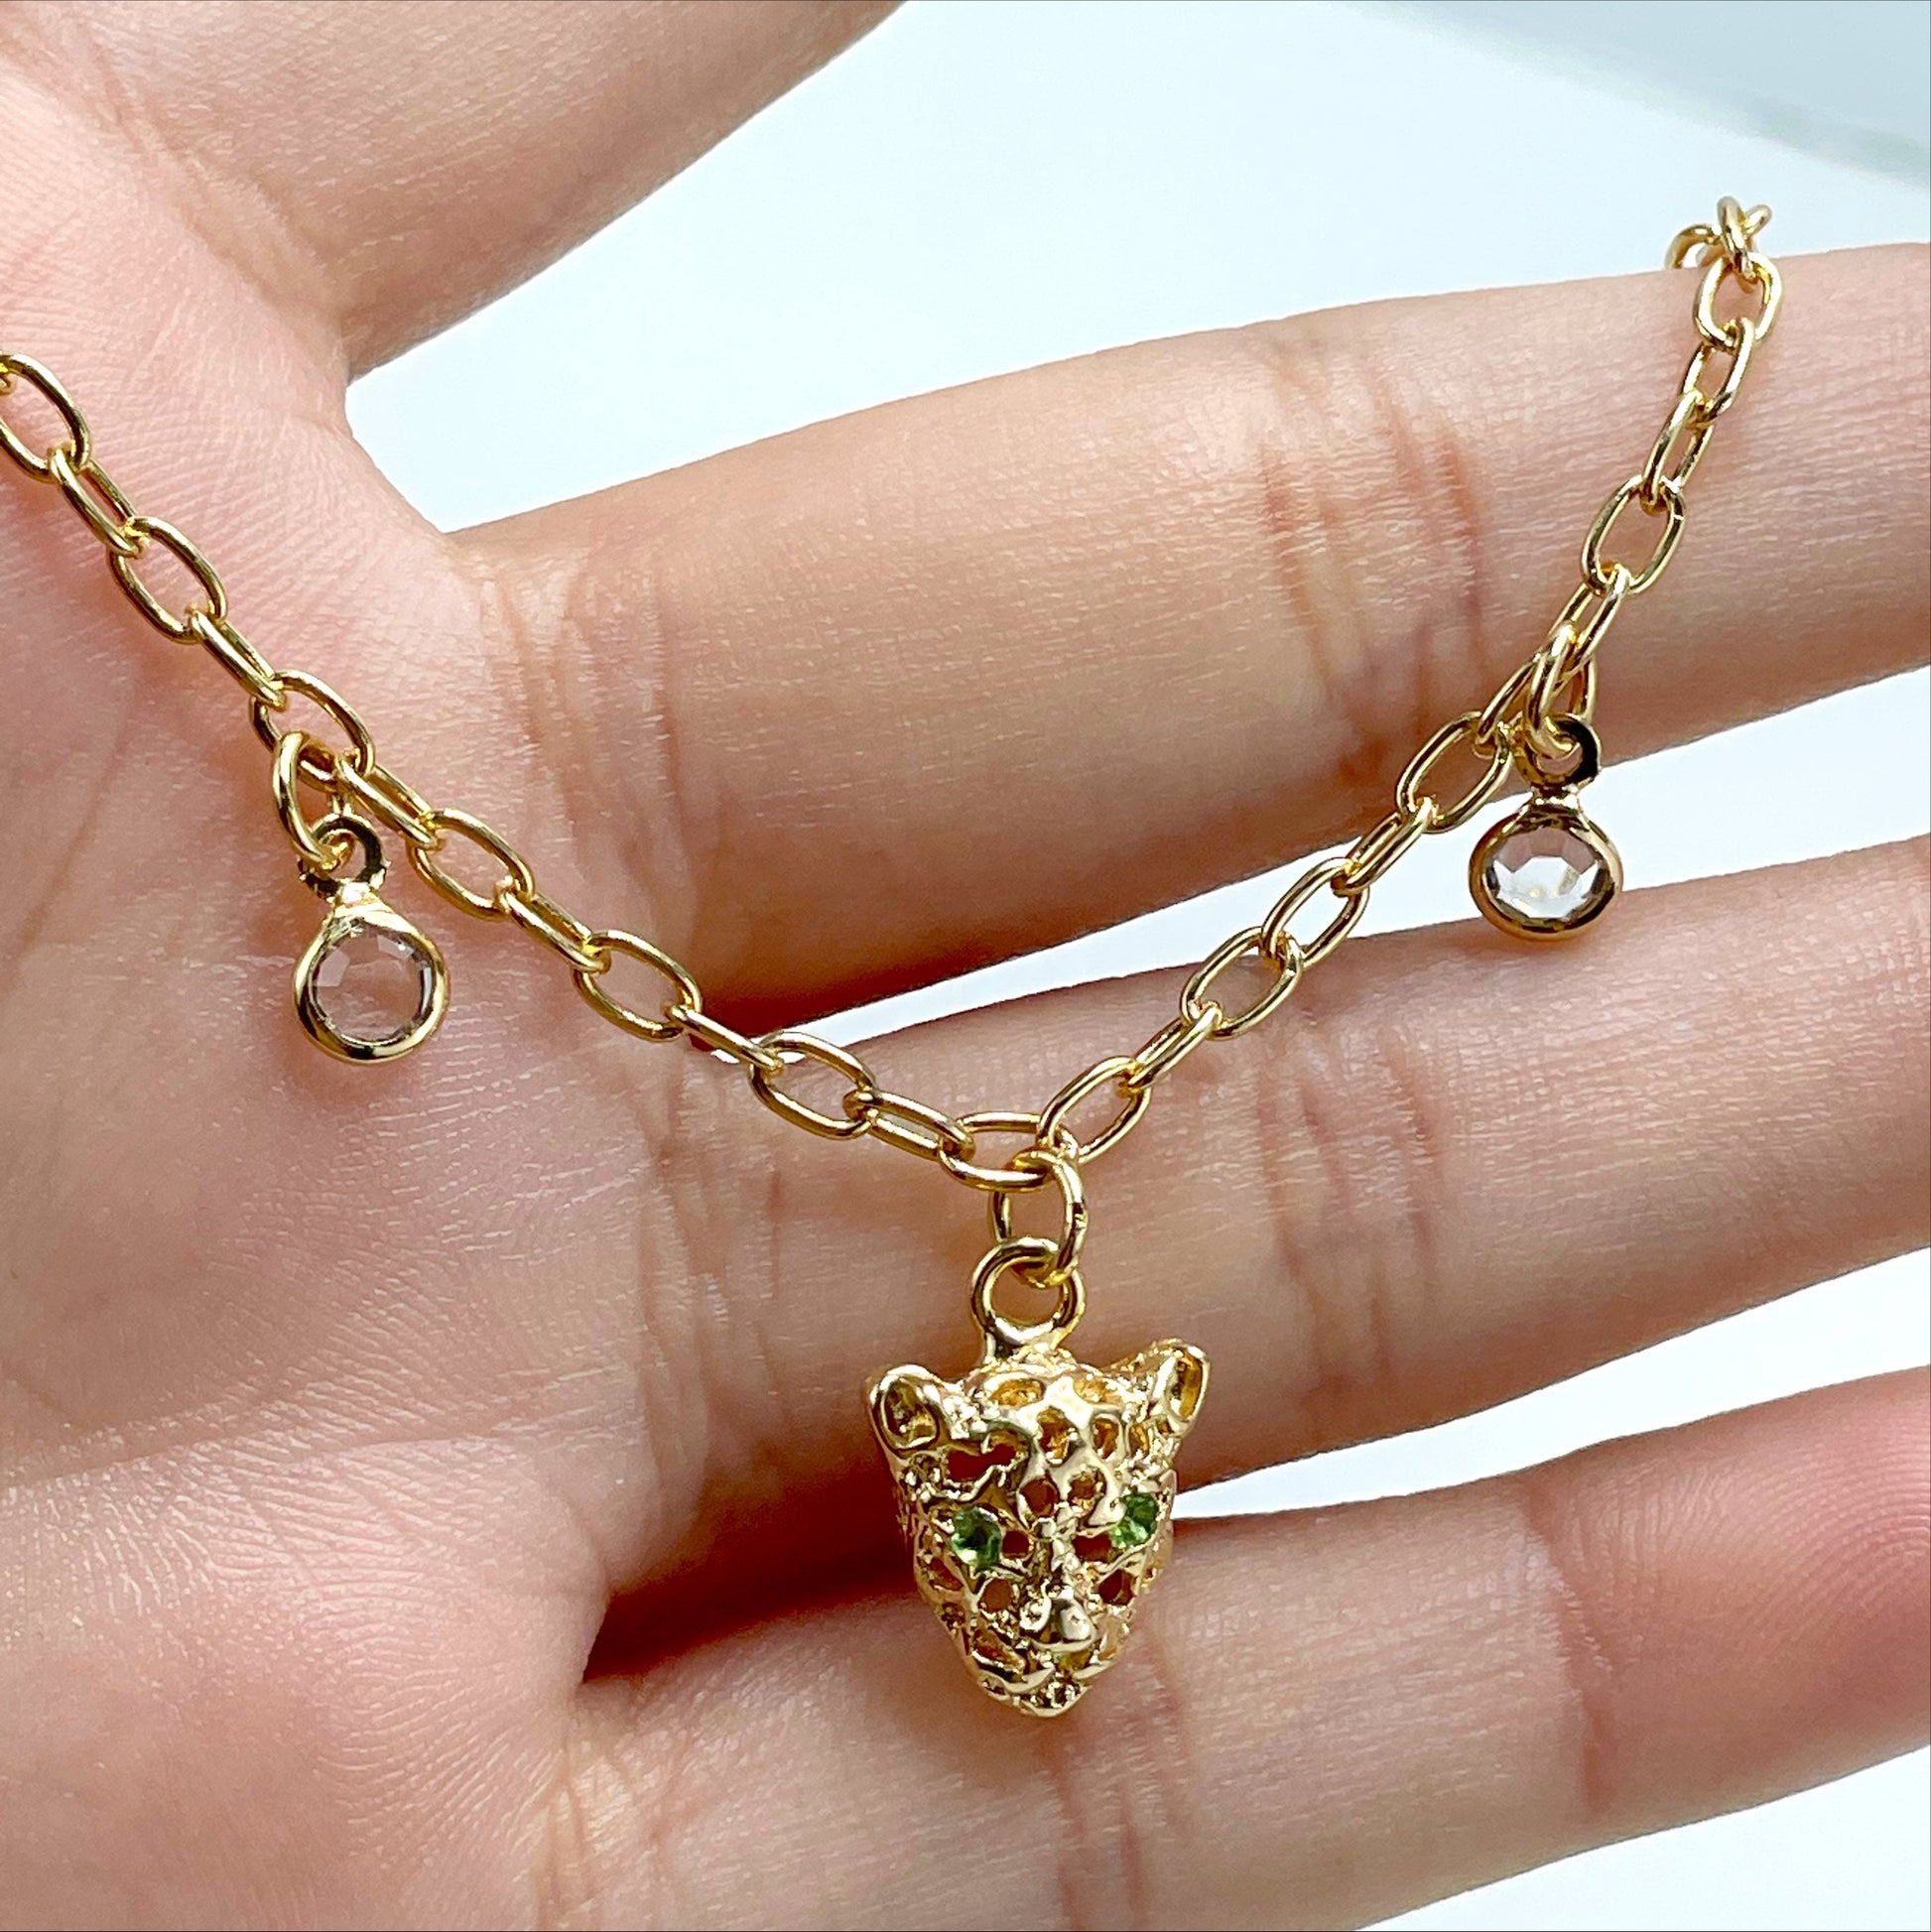 18k Gold Filled Micro Cubic Zirconia with Cutie Panther Head Shape Stud Earrings or Bracelet as a Set, Wholesale Jewelry Making Supplies